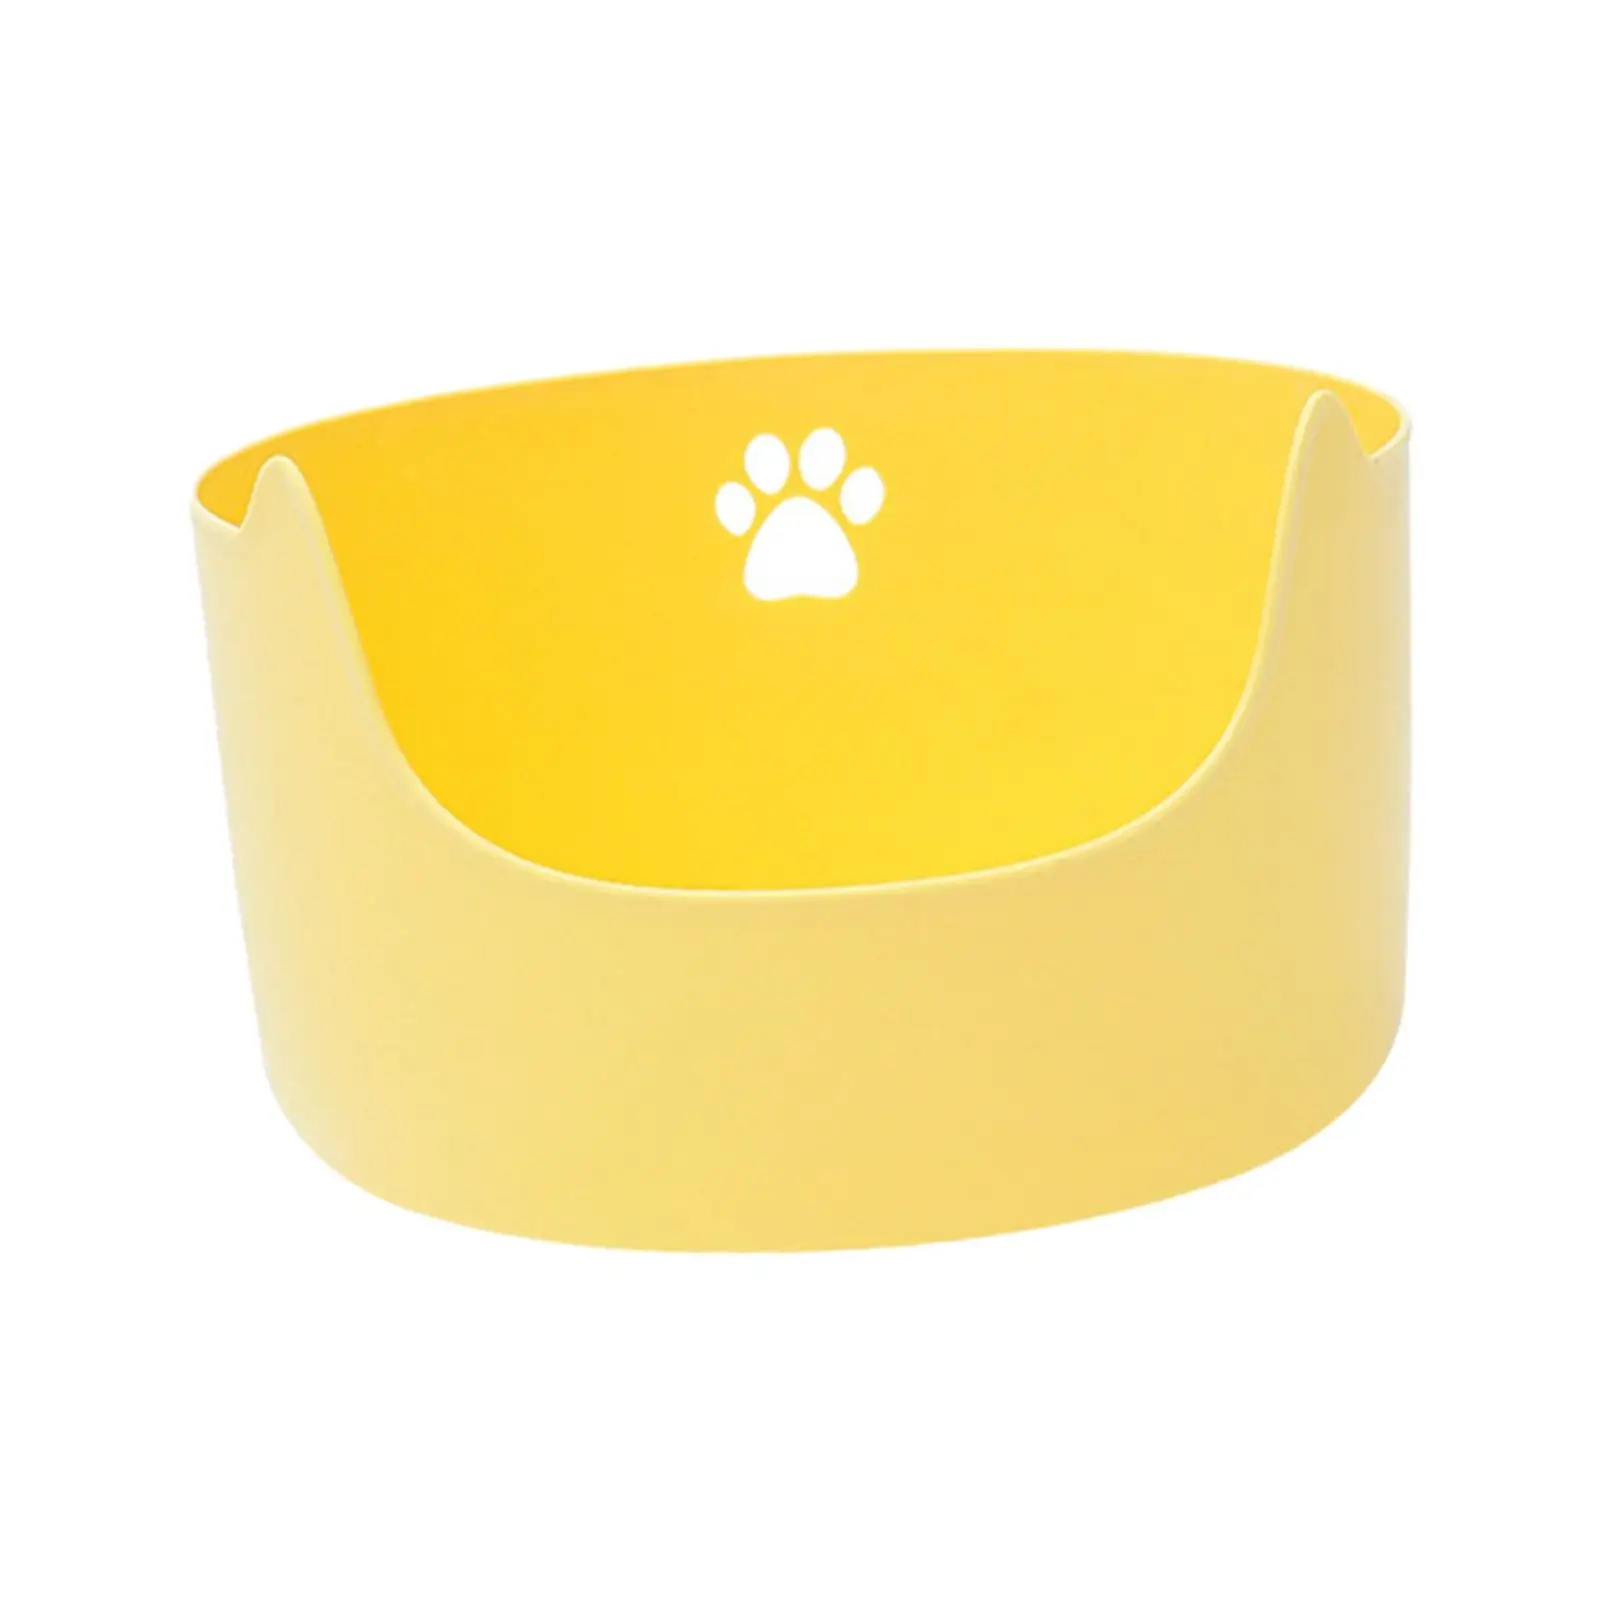 Cats Litter Pan with High Sides Nonstick Anti Splashing Pet Supplies Open Cats Litter Tray Extra Large Cat Cleaning Bath Basin